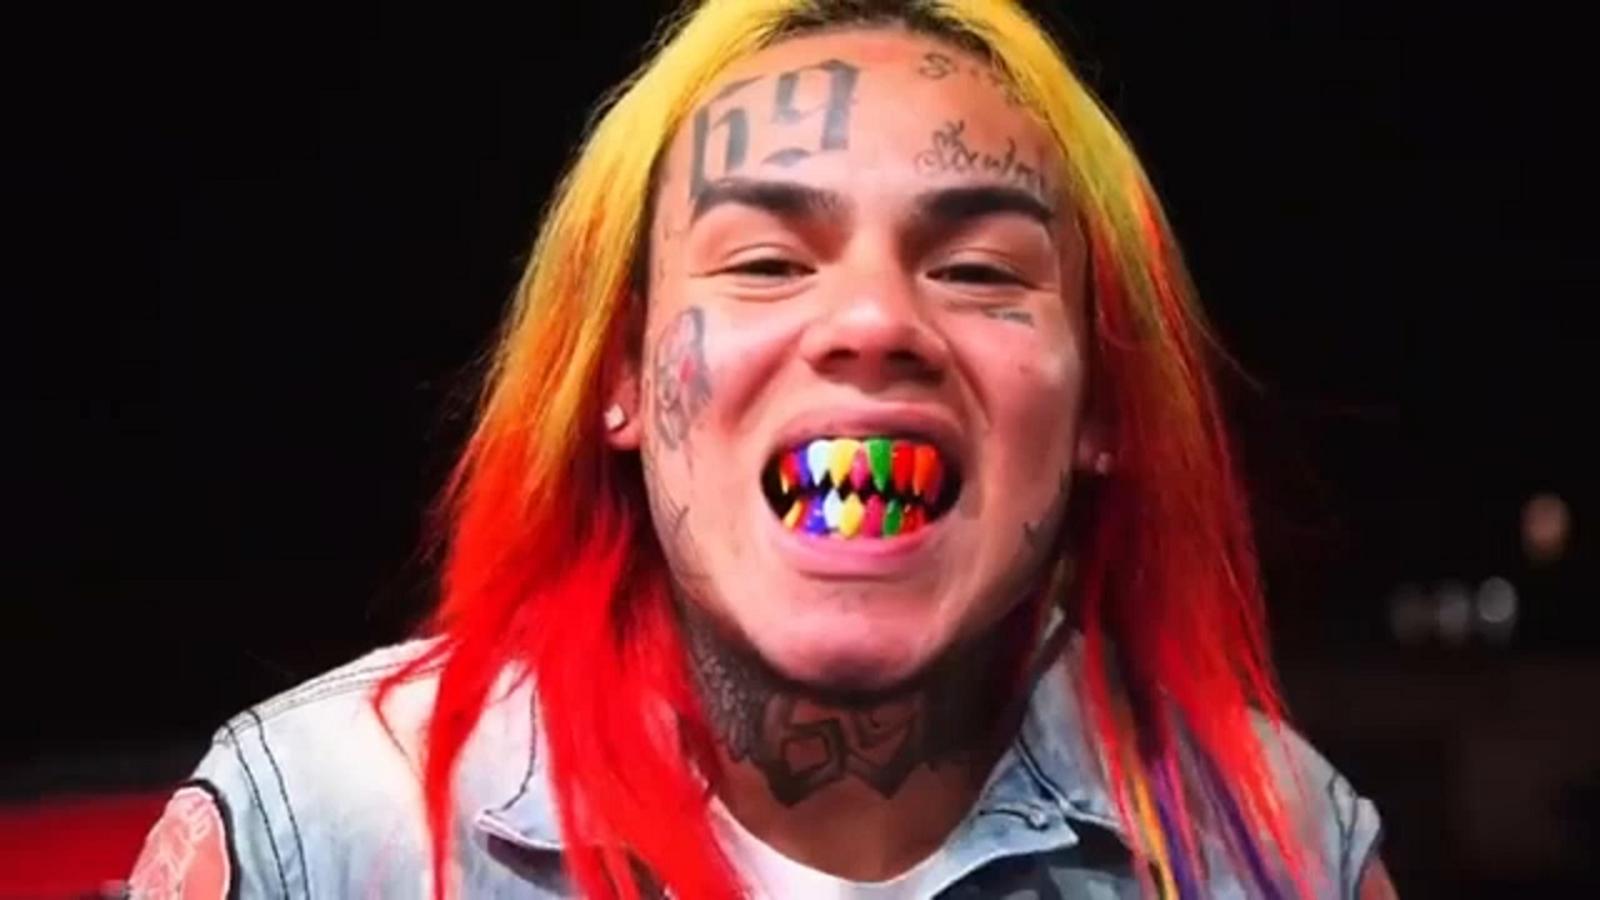 Rapper 6ix9ine says men forced him from car in Brooklyn, robbed him